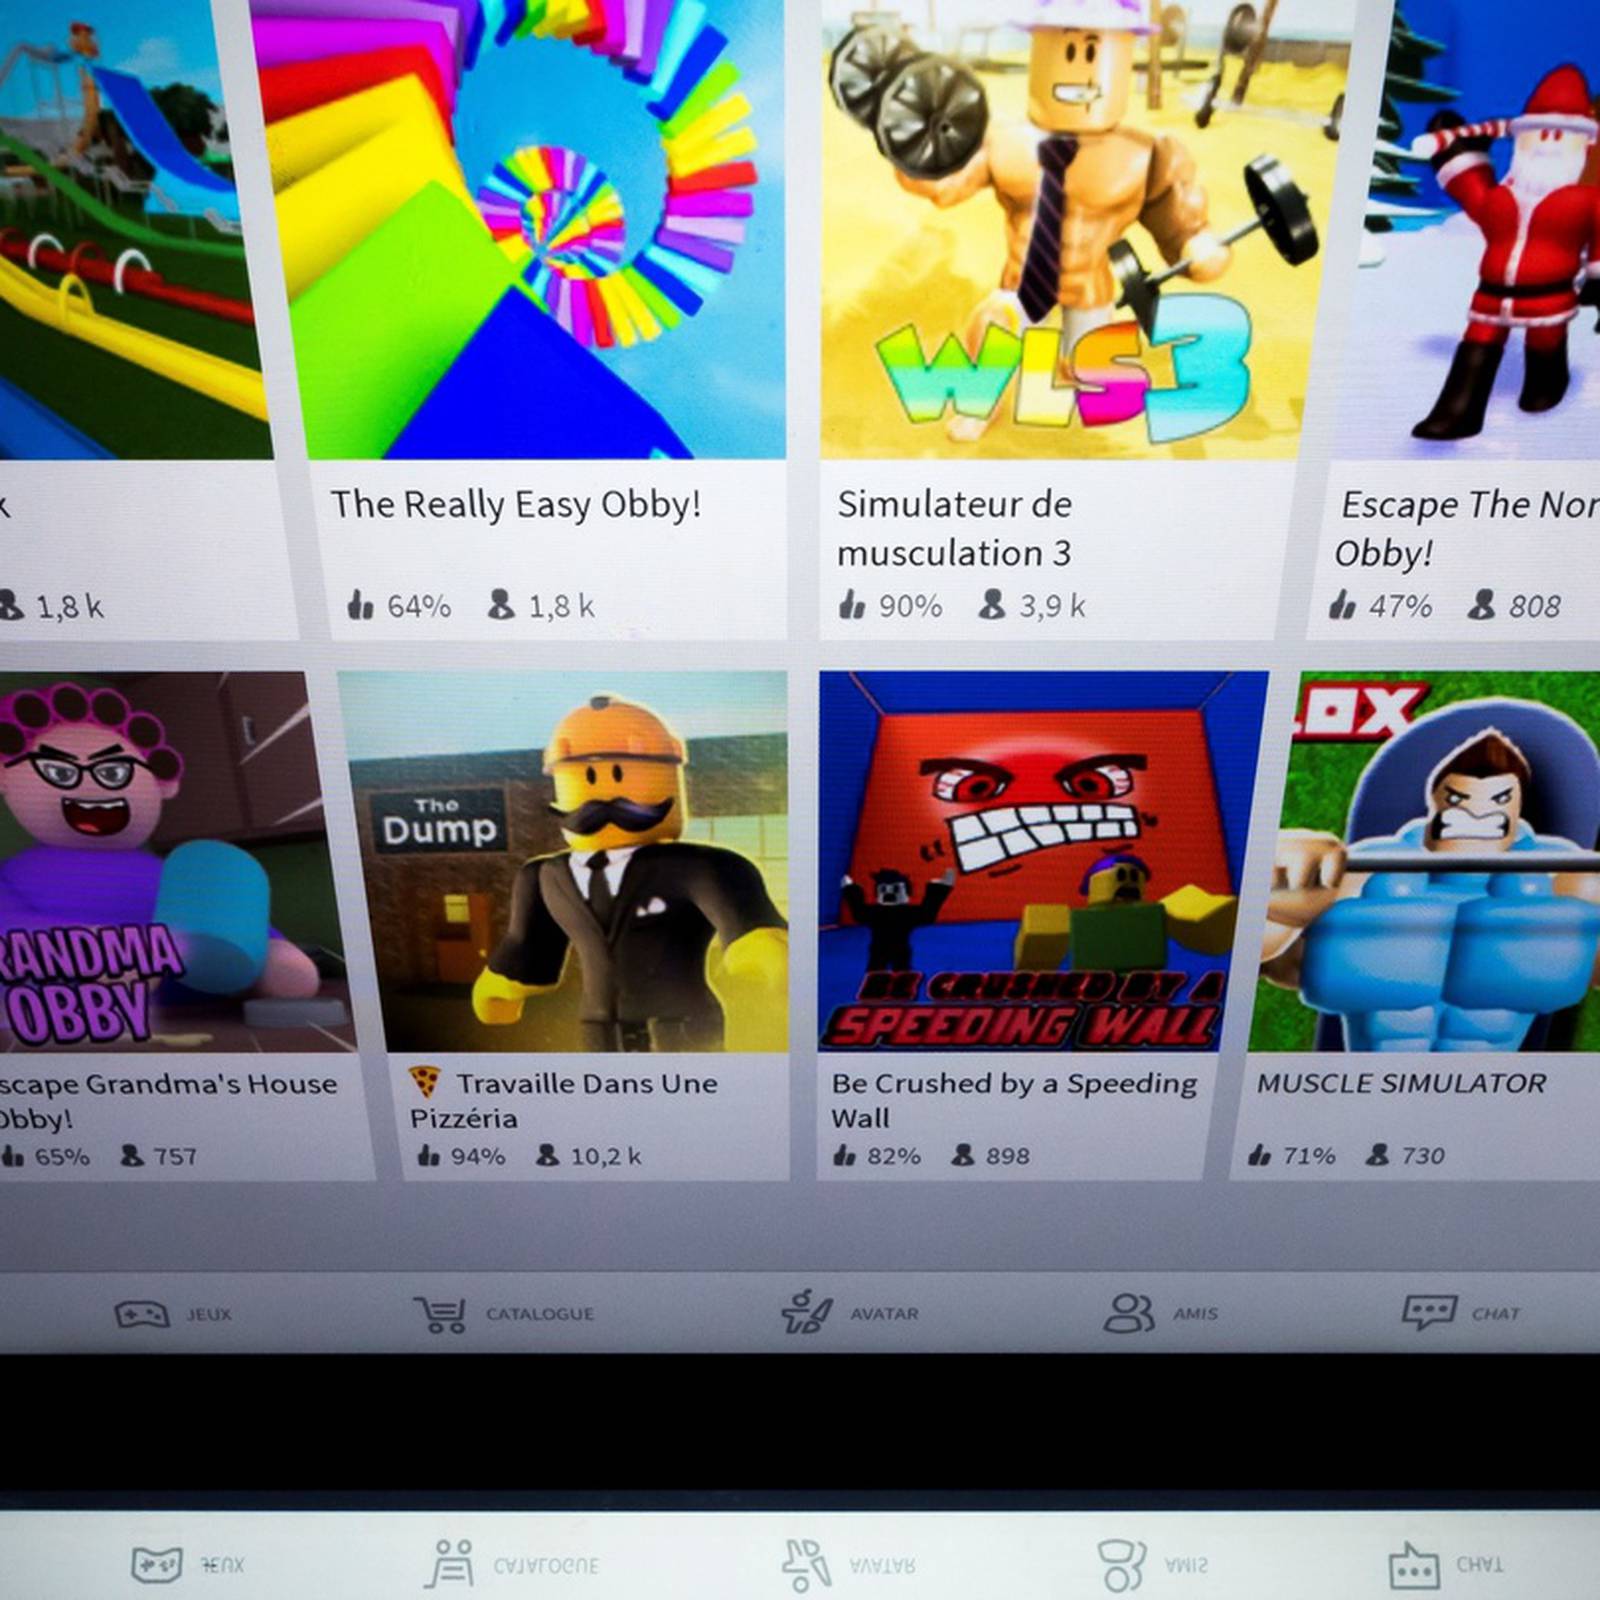 Roblox Mobile Has Grossed More Than $1 Billion in Lifetime Revenue